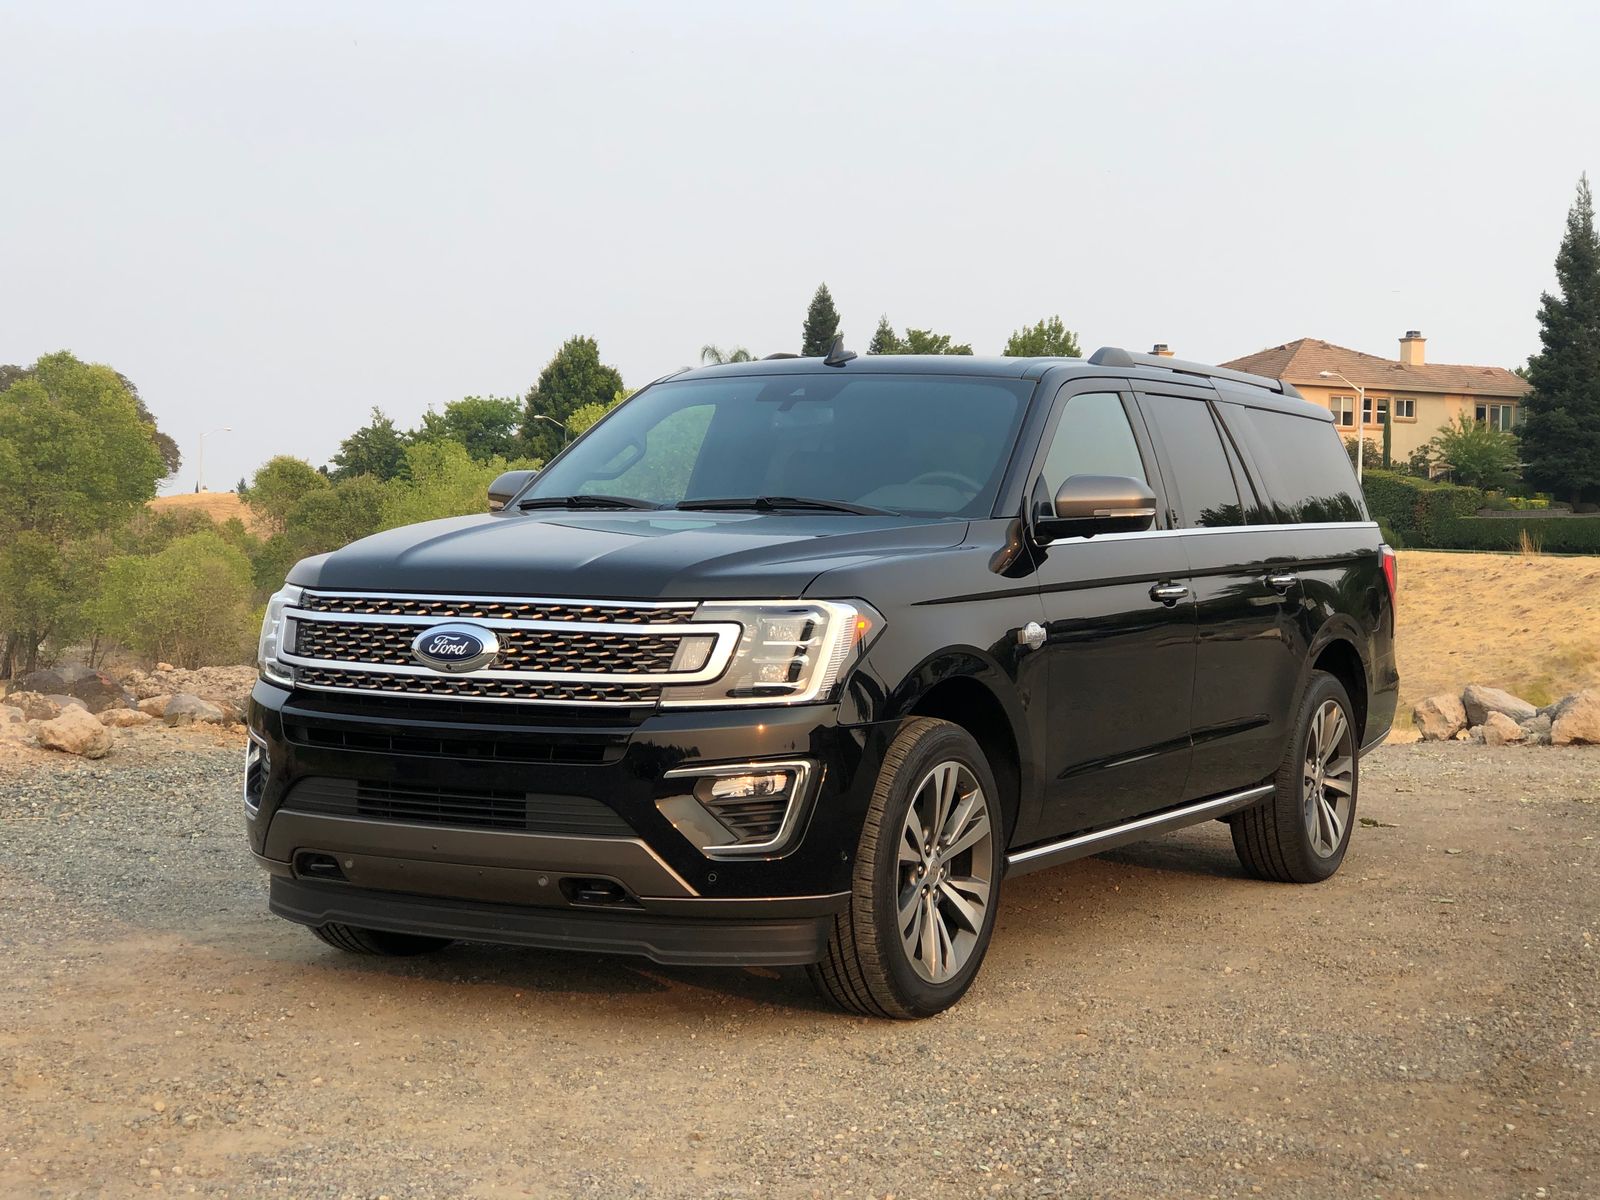 2020 Ford Expedition Max King Ranch Review – Comfort to the Max